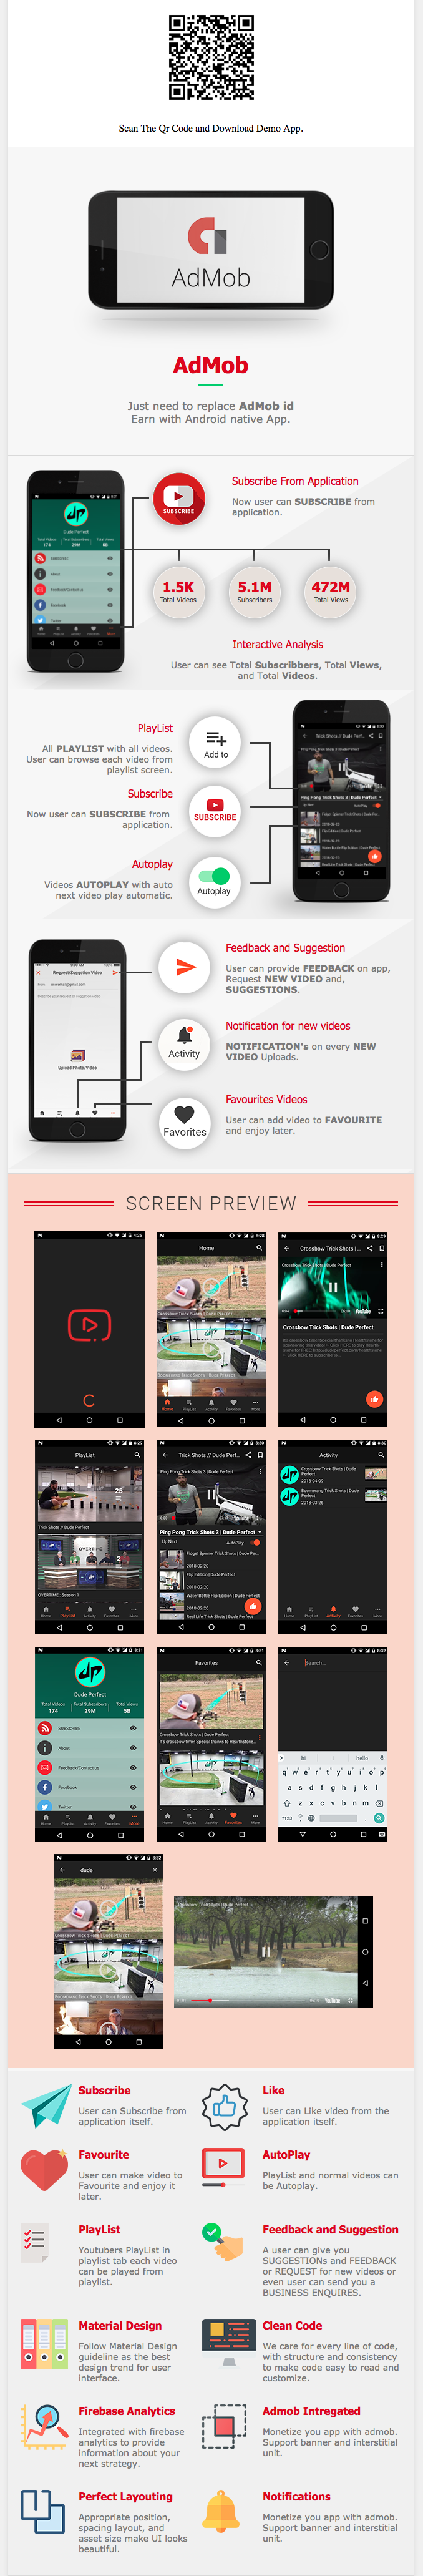 Youtubers Application For Android. (Android Application for YouTube Channel) - 4